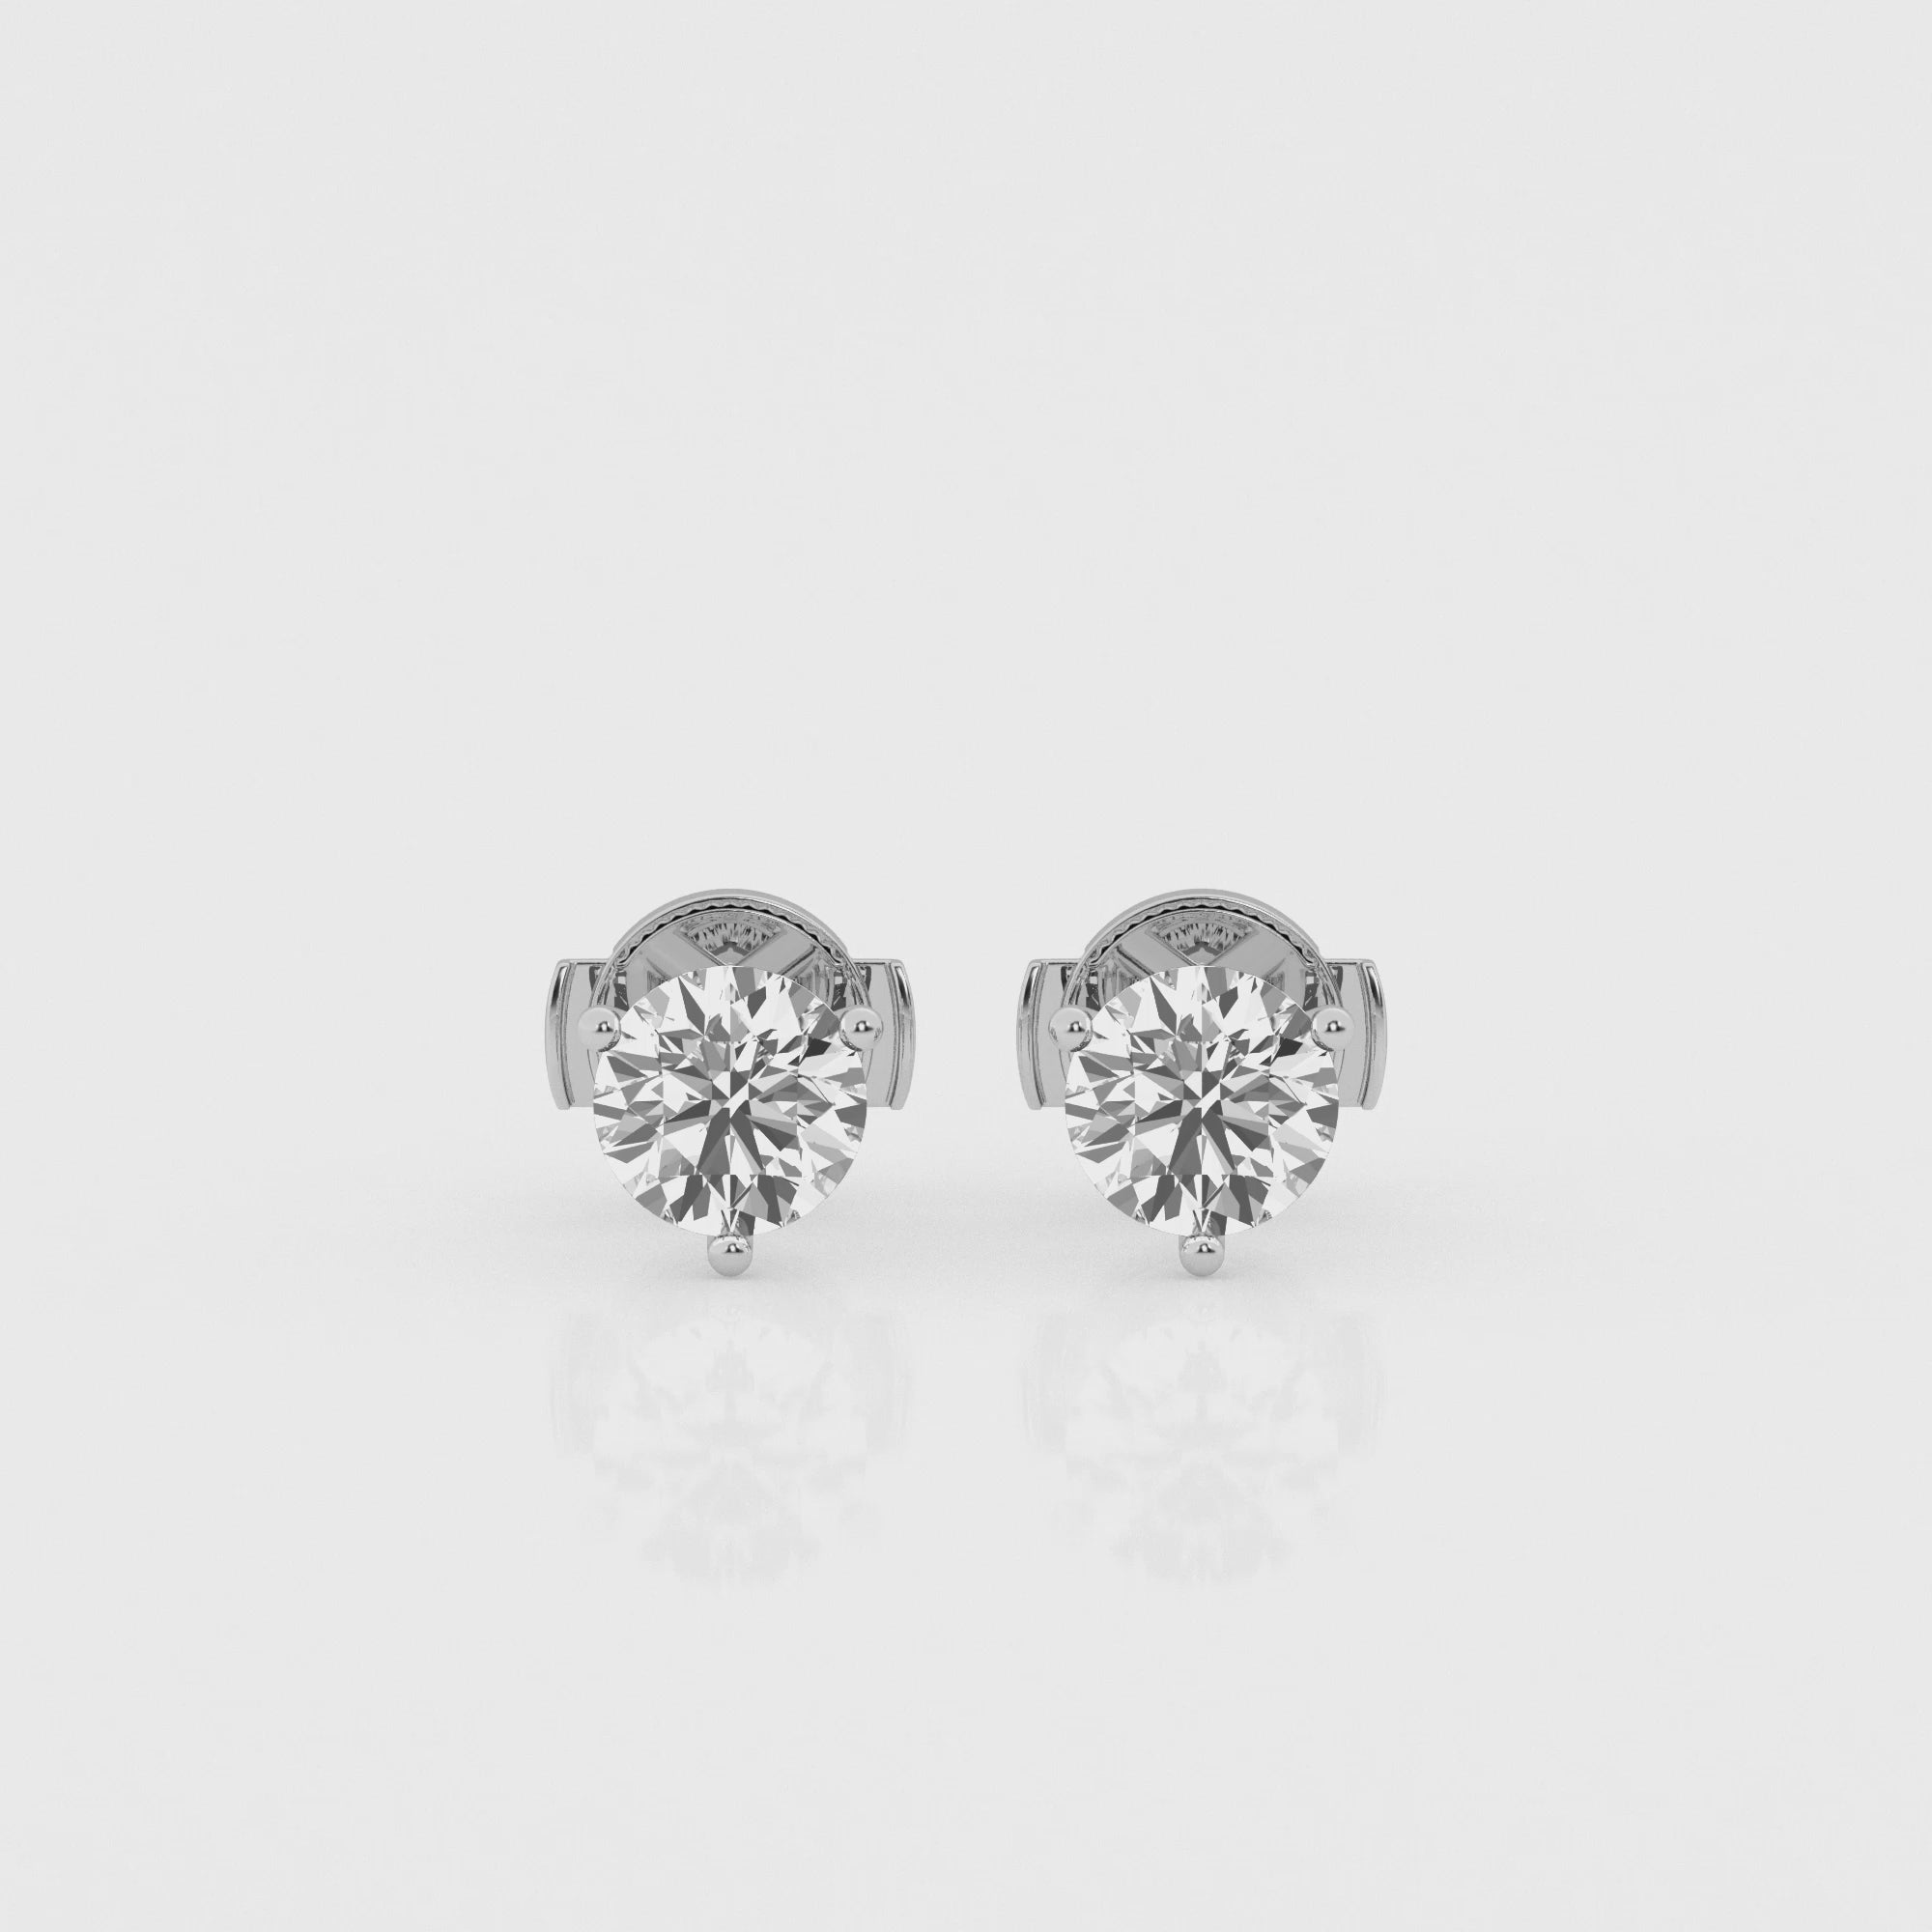 video of White gold stud earrings featuring 1.5 carat lab-grown round diamonds